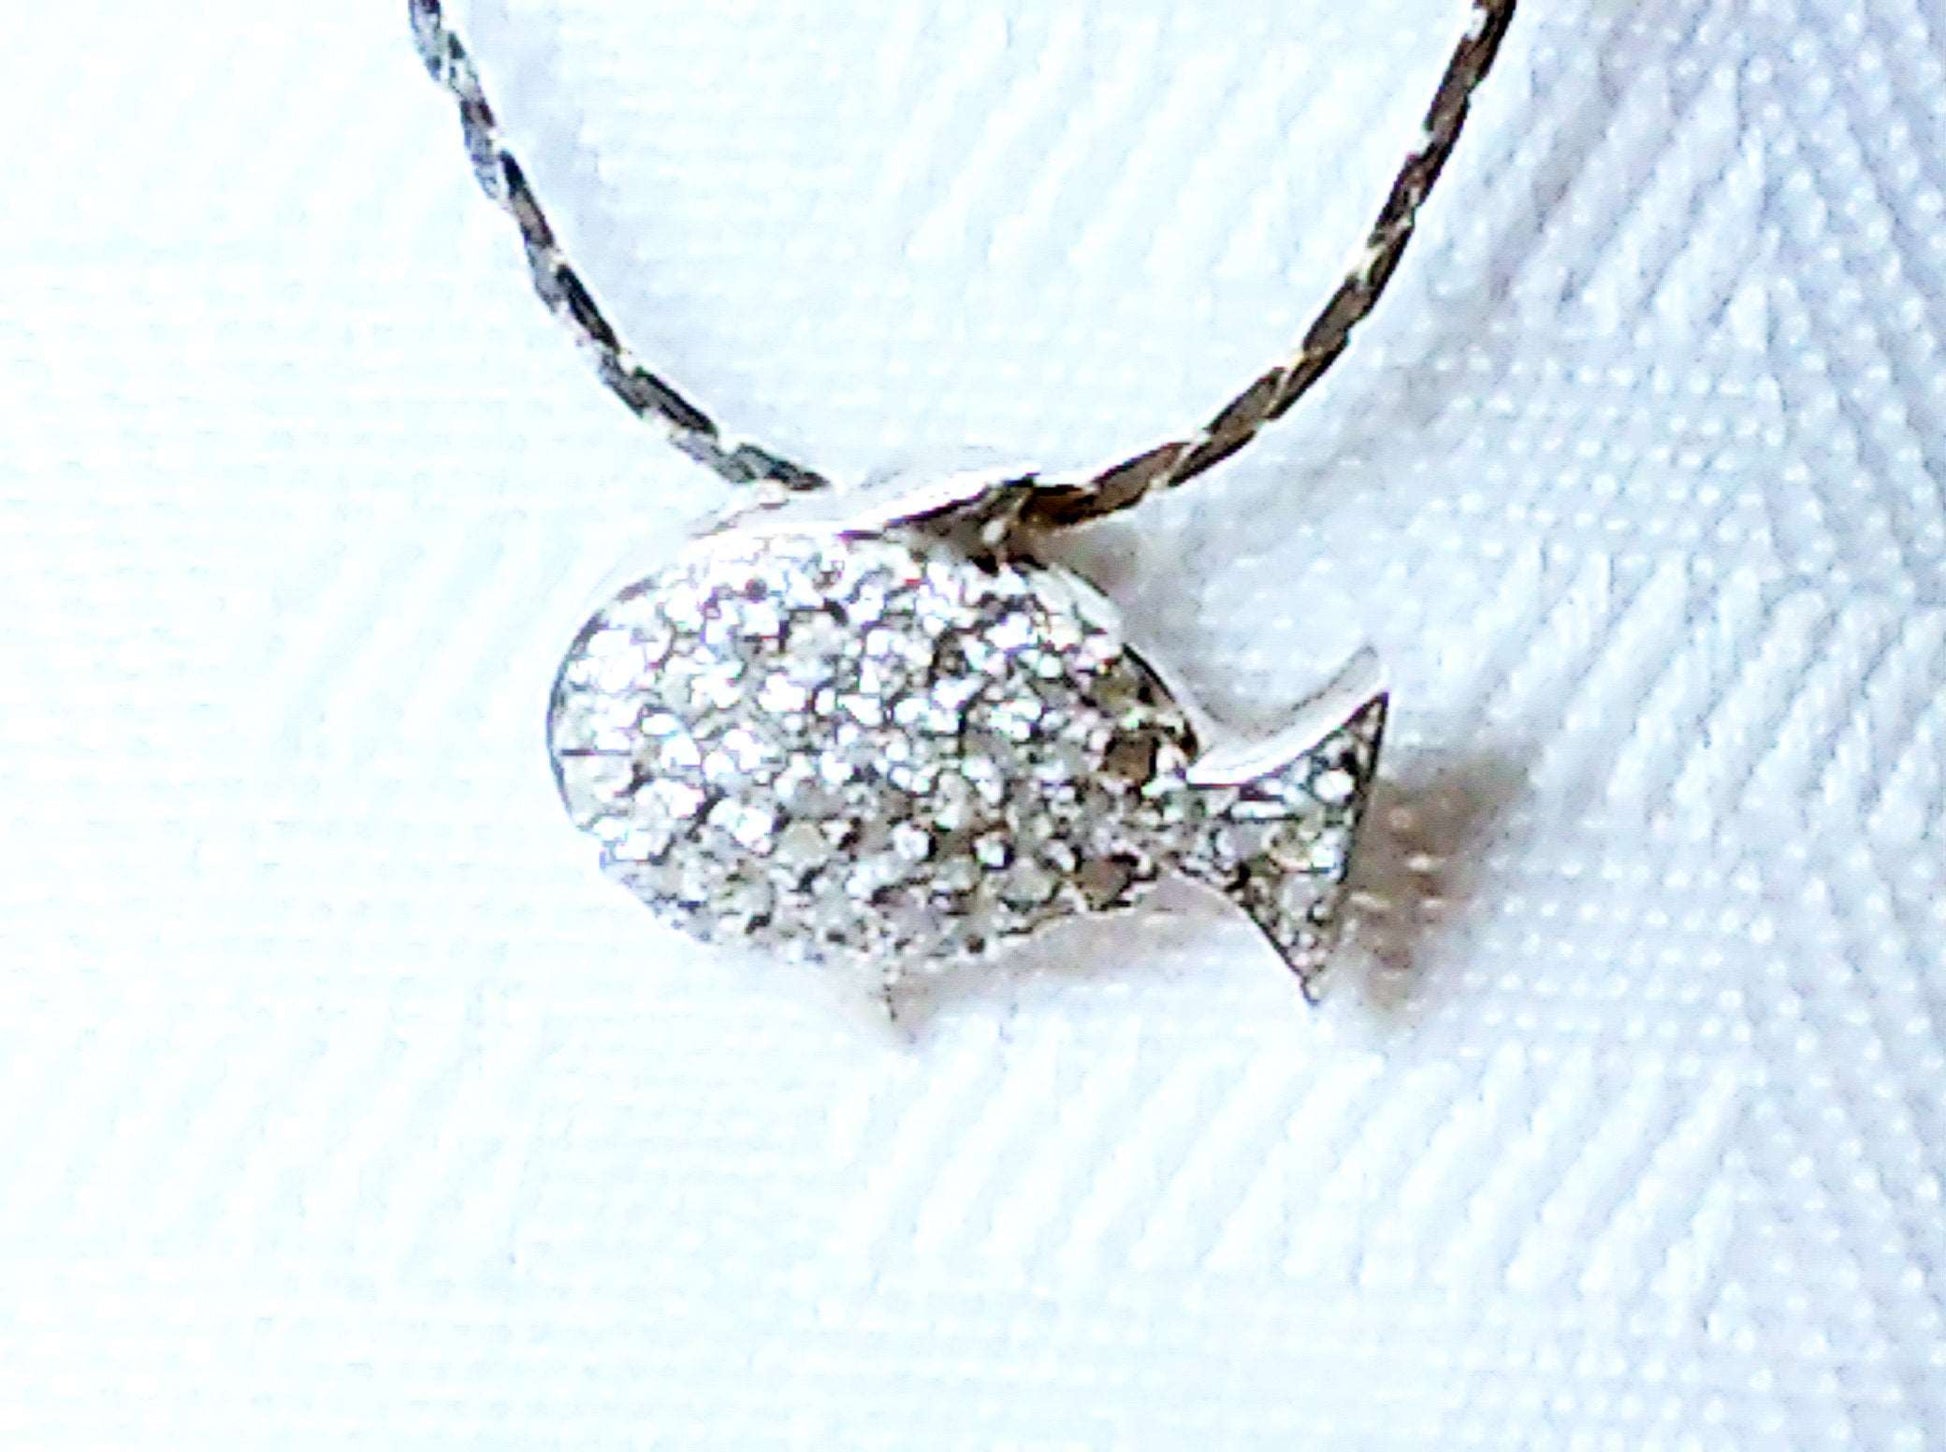 Sterling silver fish pendant with cubic zirconia stones - Providence silver gold jewelry usa